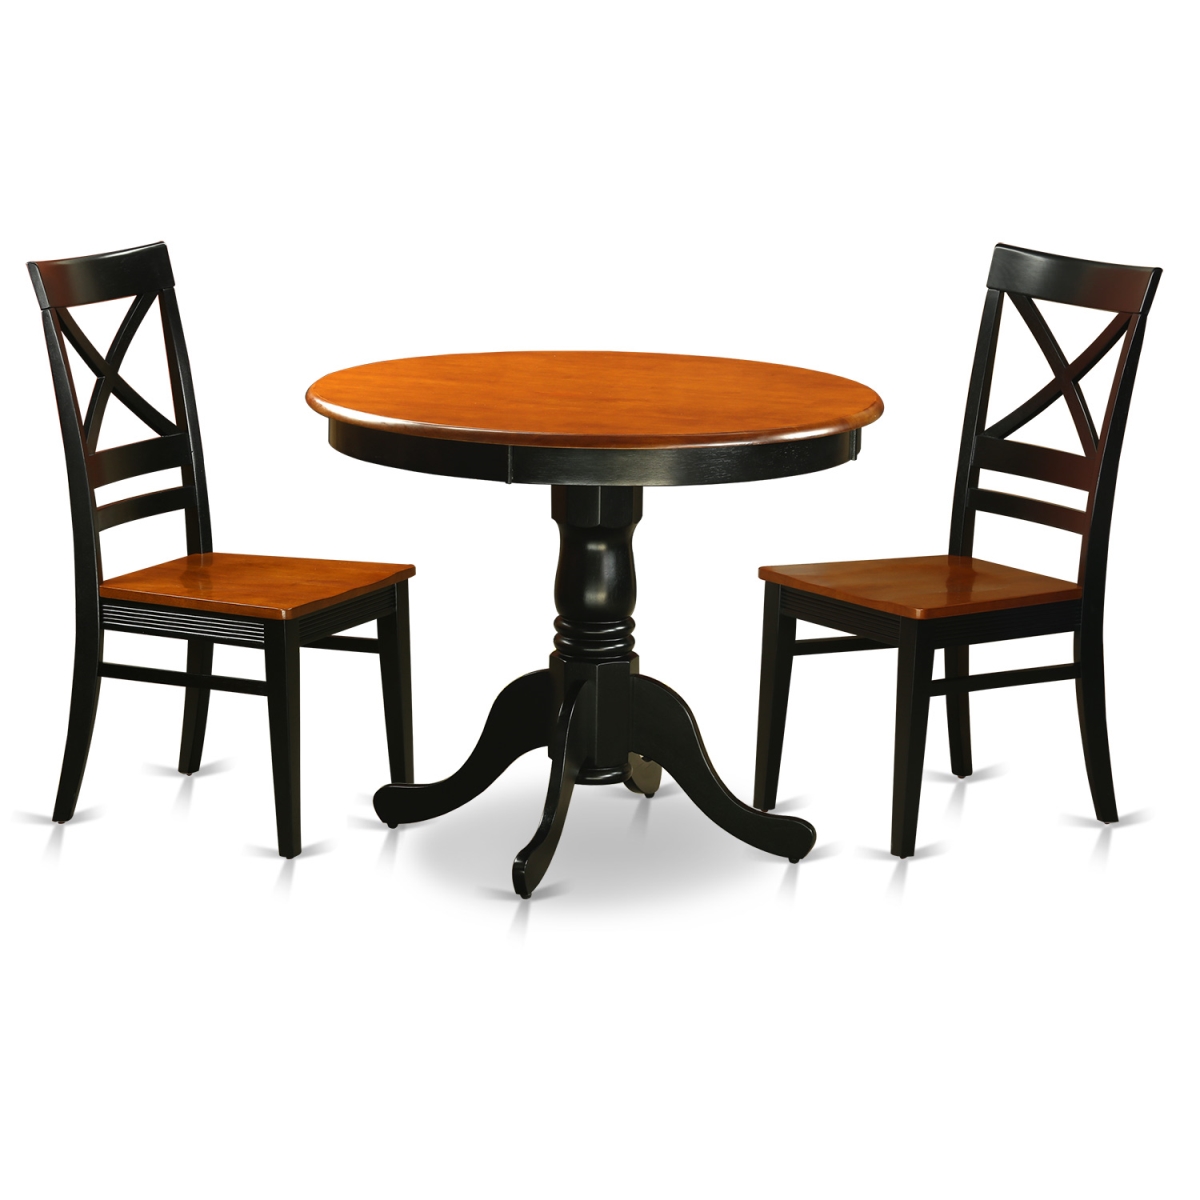 Picture of East West Furniture ANQU3-BLK-W Wood Seat Dining Set with 2 Chairs, Black & Cherry - 3 Piece